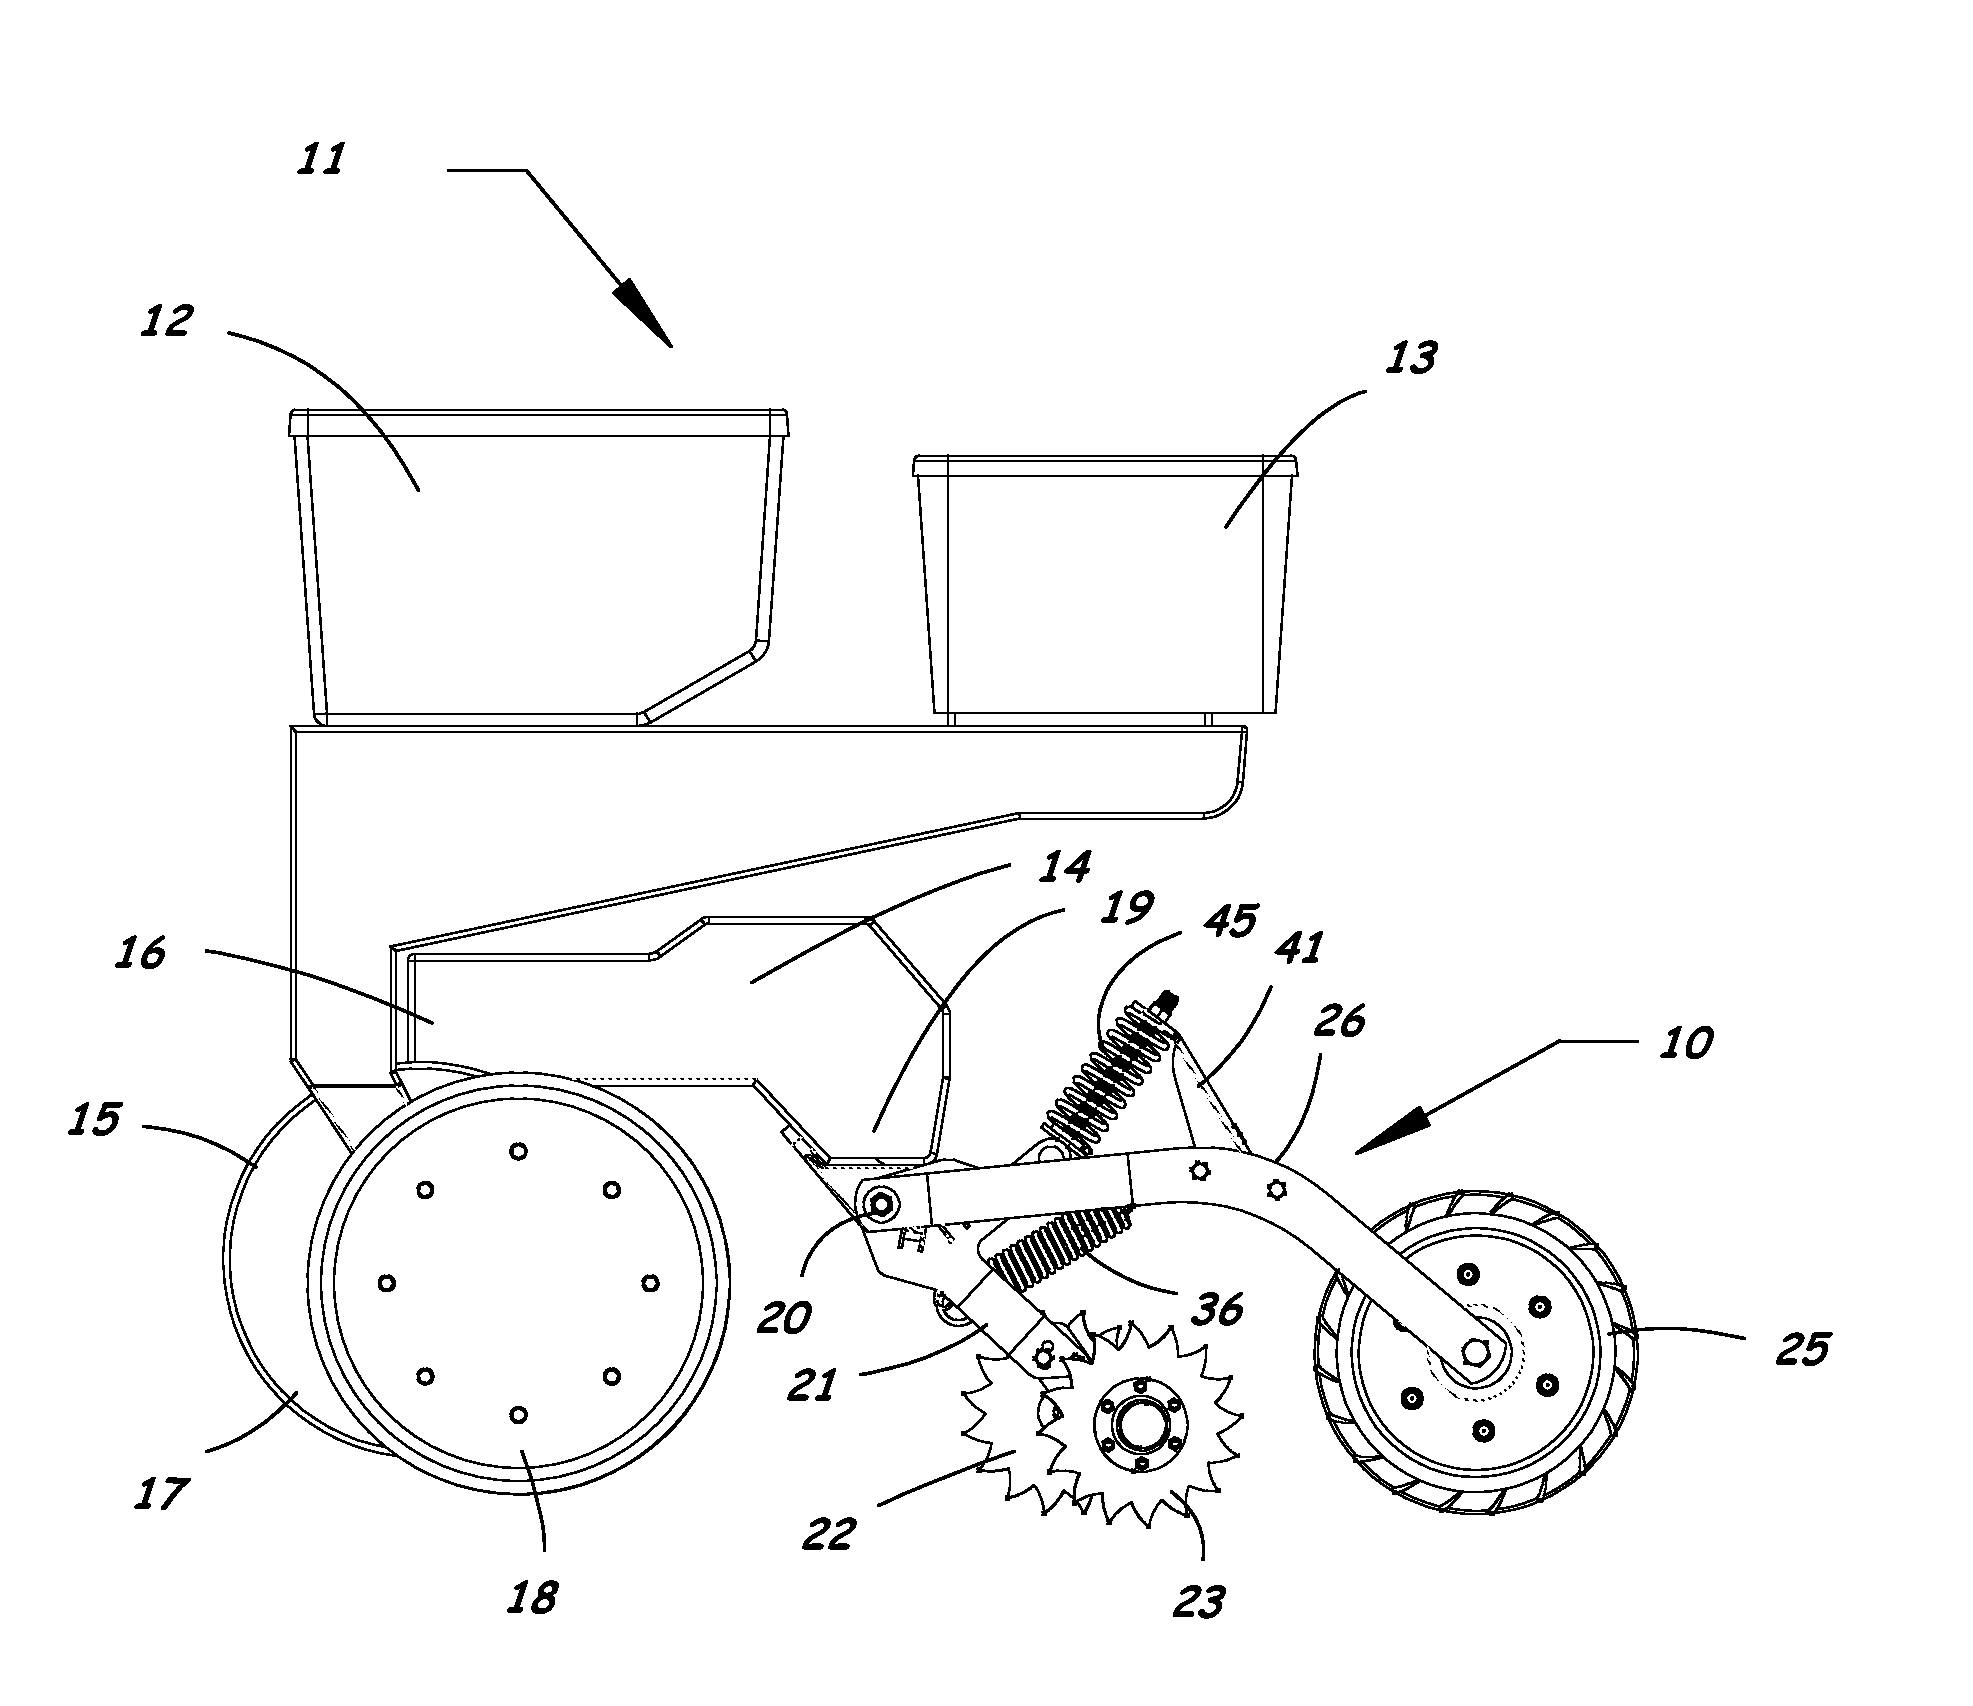 Furrow closing assembly and method